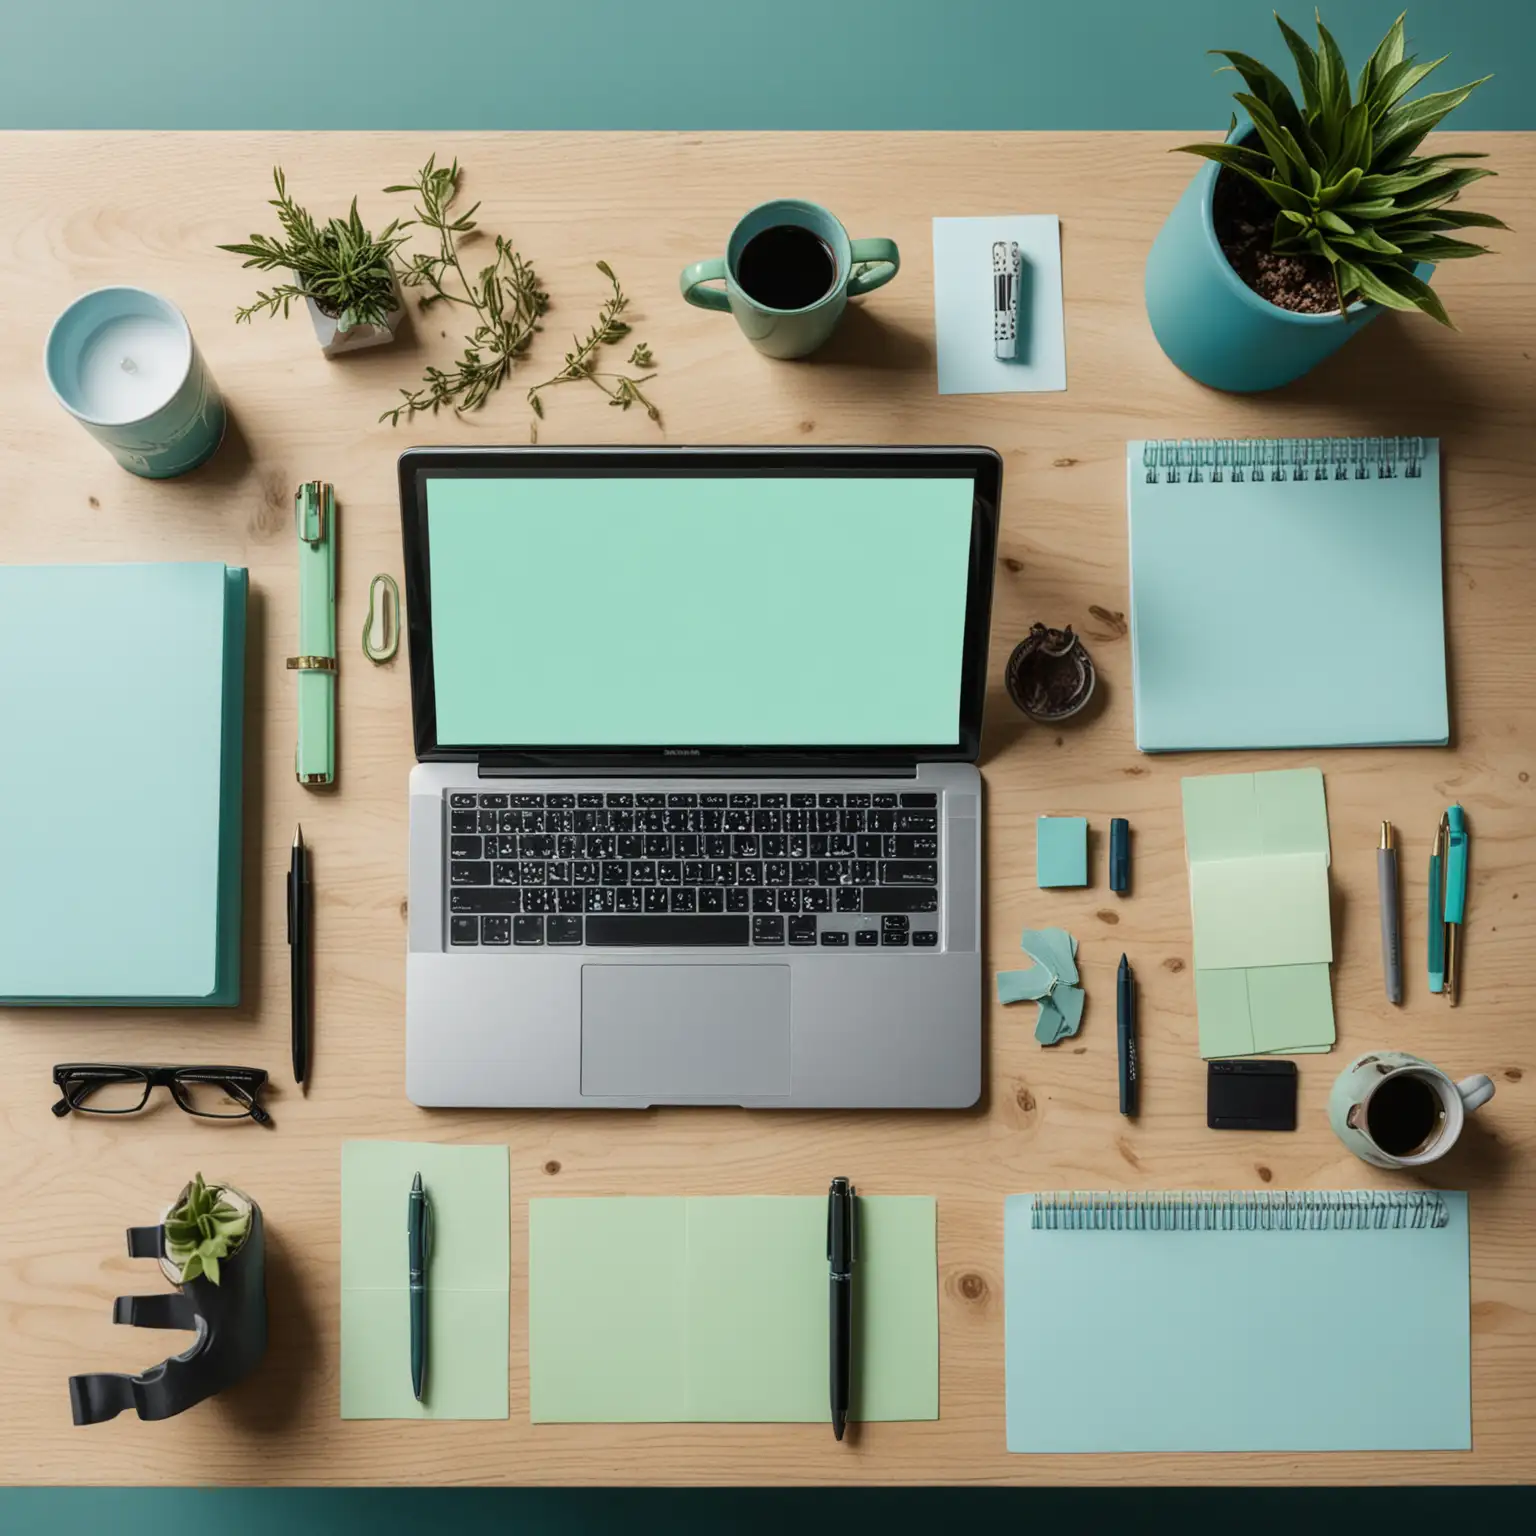 Generate a flat lay image of a workspace. Include items such as a laptop, notebook, coffee cup, pens, and sticky notes, all arranged neatly on a desk. Use a harmonious blue and green color palette for all items.